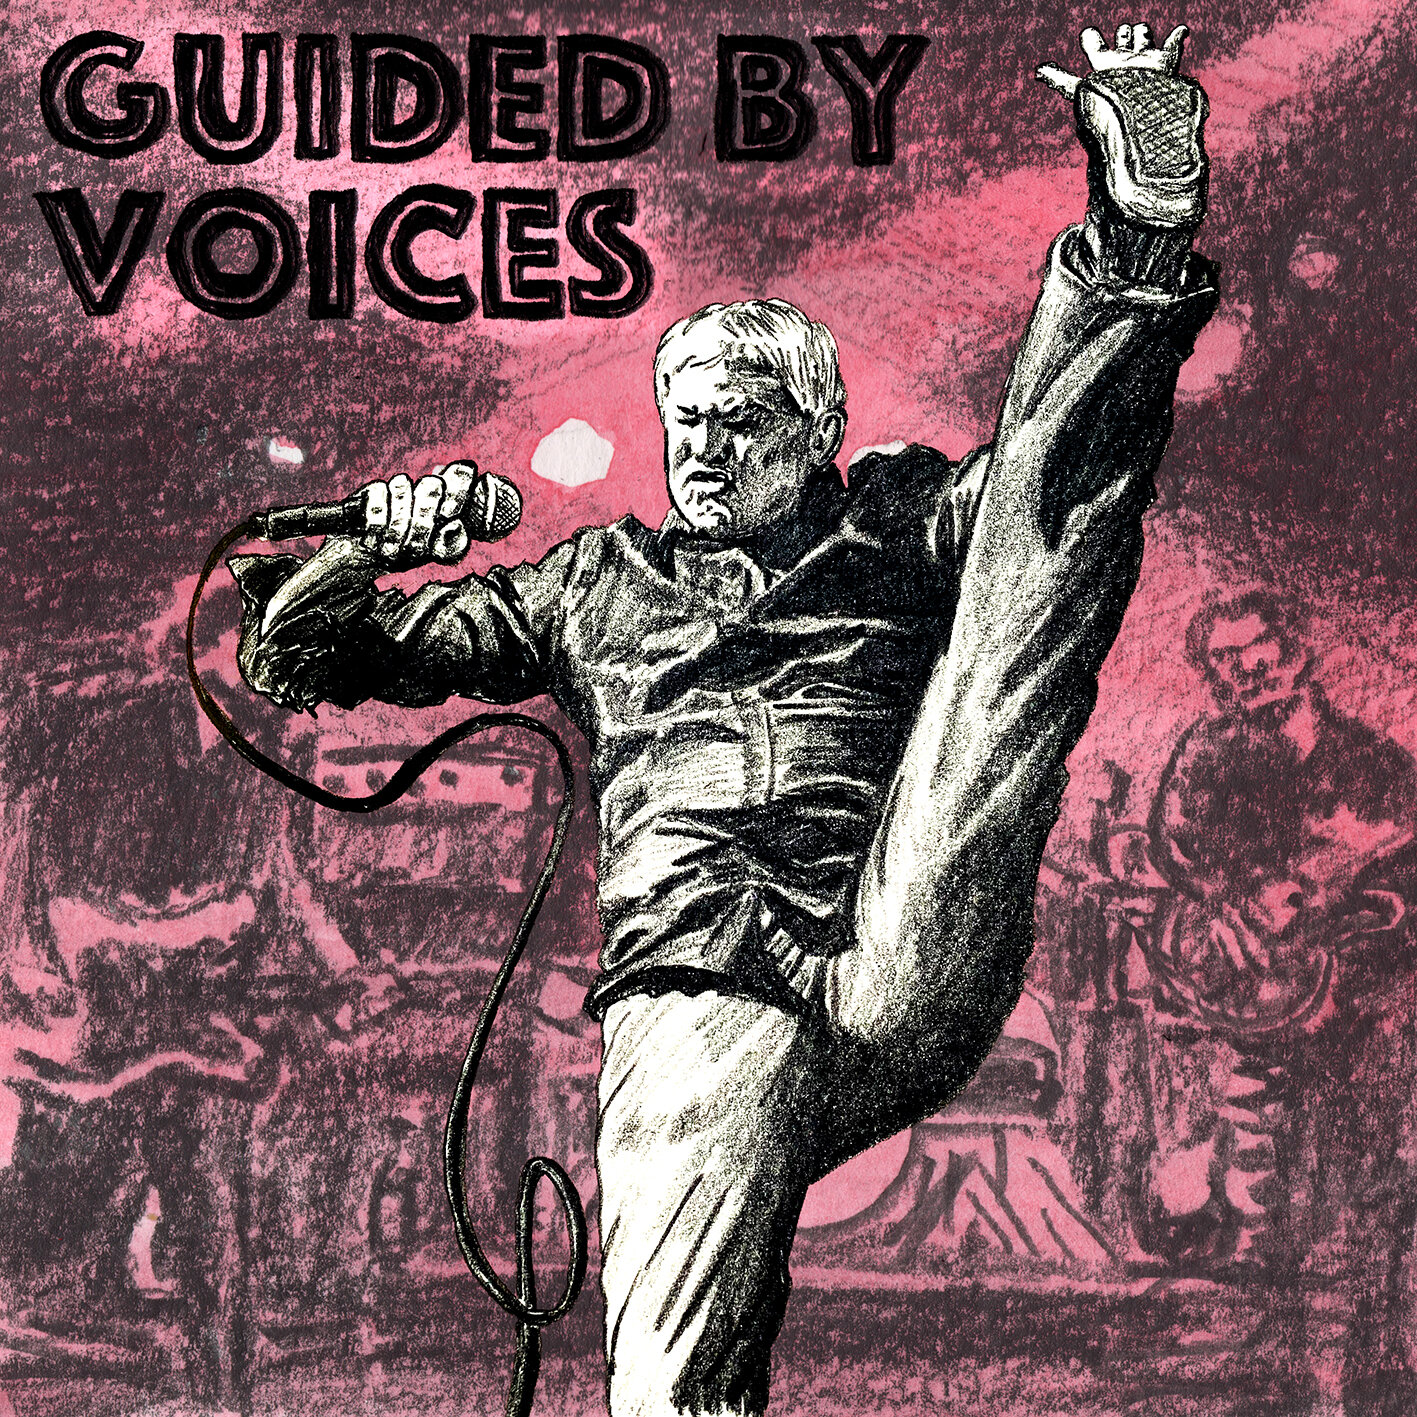 Guided by Voices — THE SONG SOMMELIER